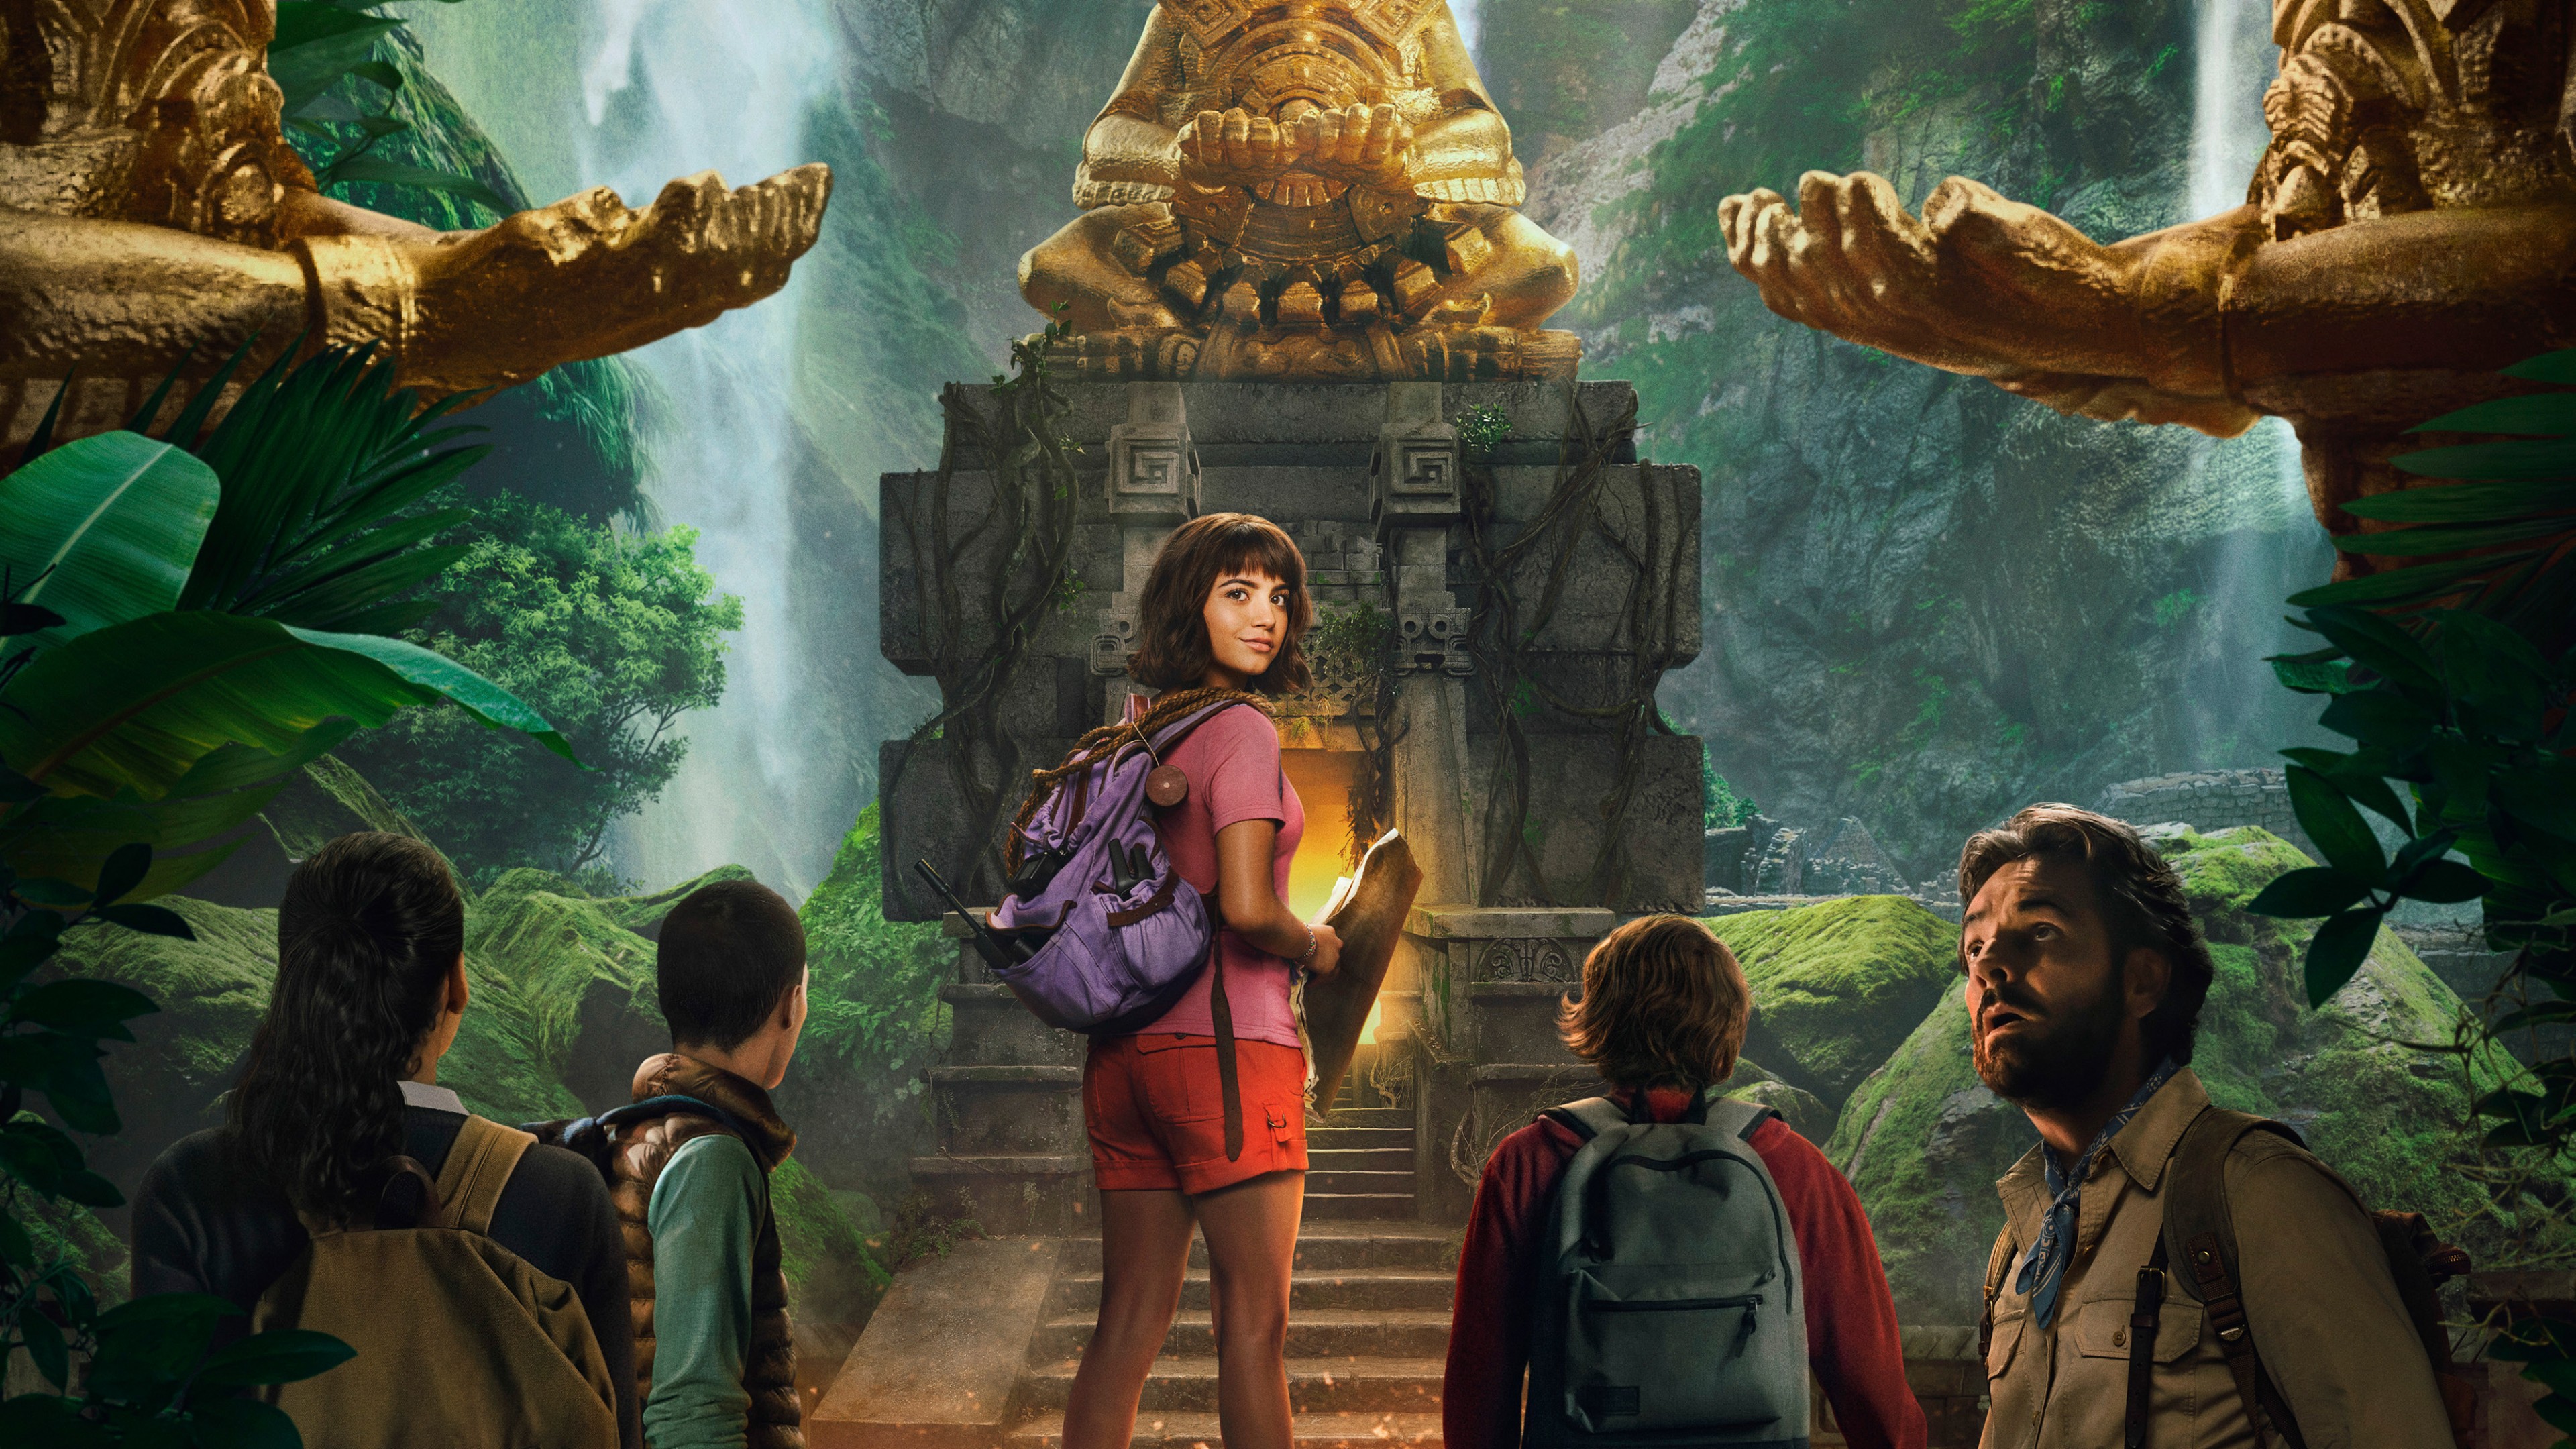 Dora And The Lost City Of Gold 2019 Hd Wallpaper 4k - Dora And The Lost City Of Gold - HD Wallpaper 